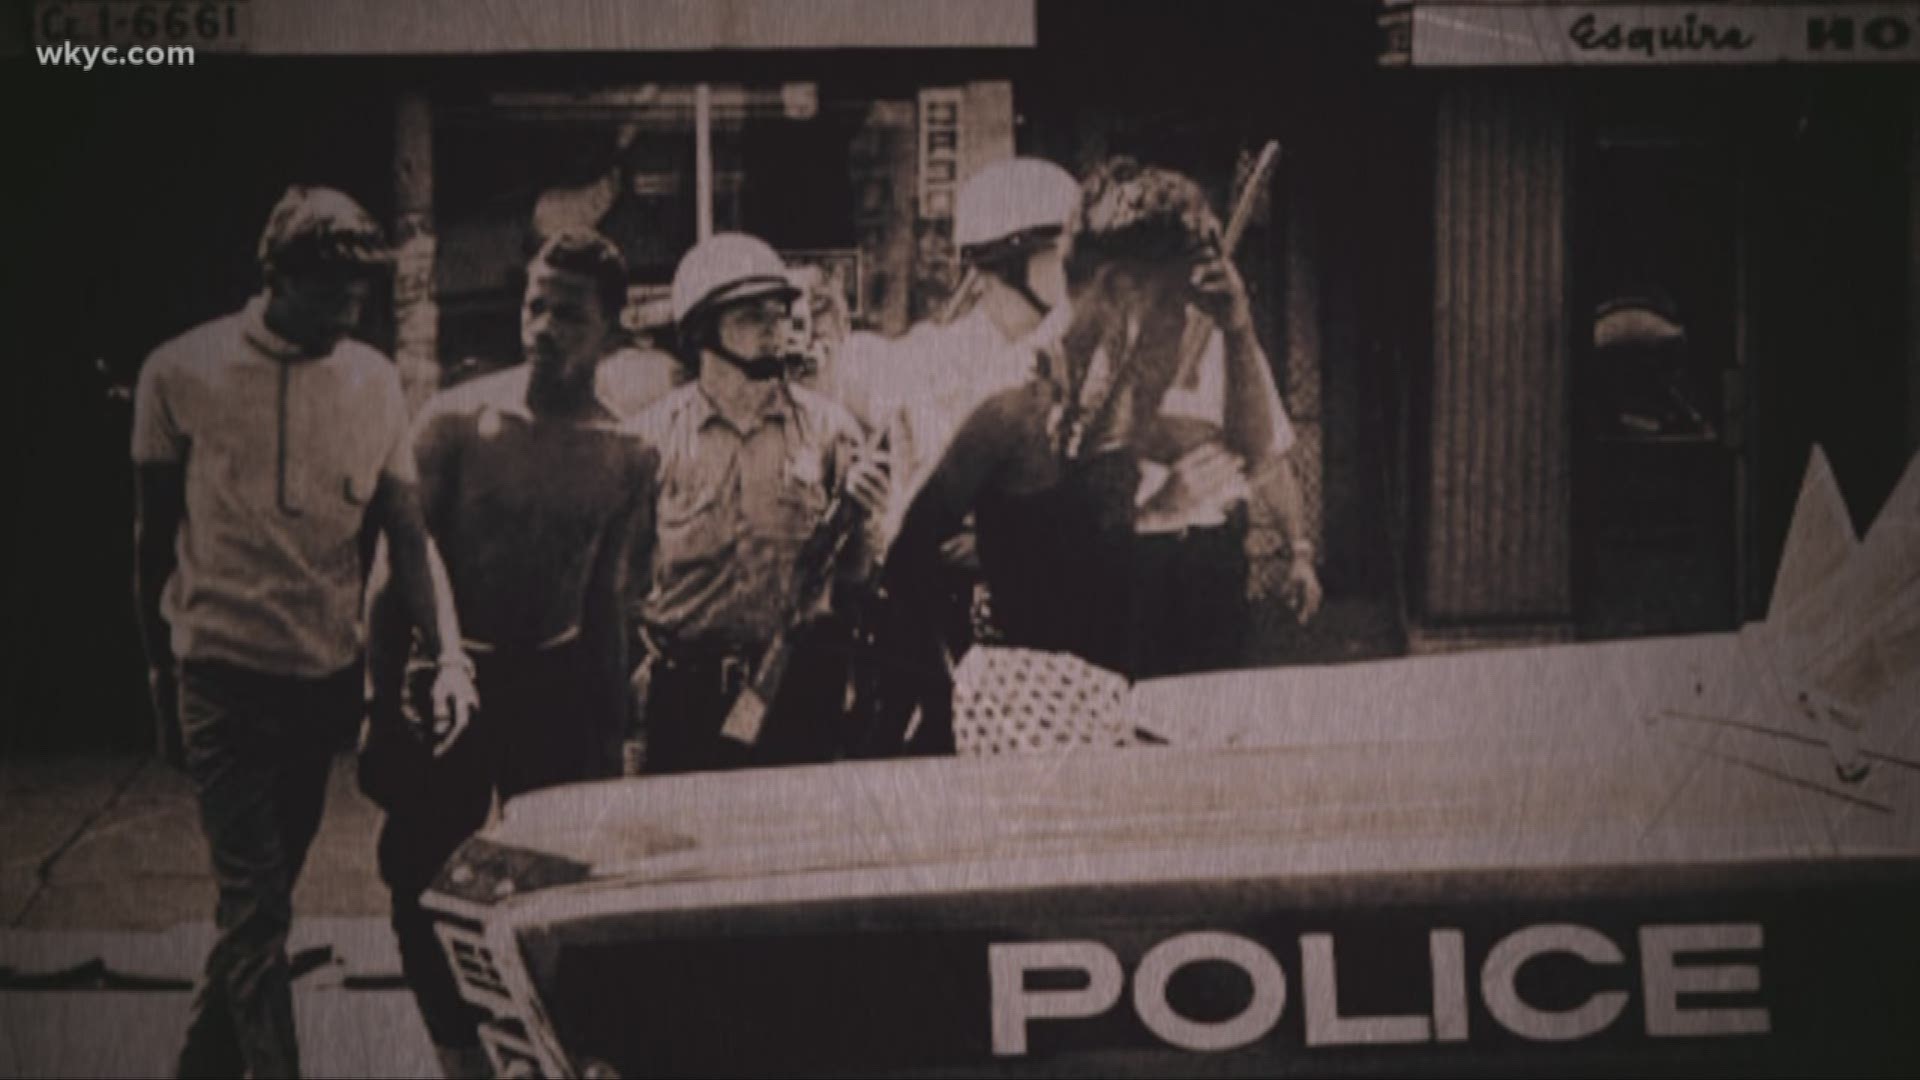 Part 2 of "50 years later: How race and rebellion sparked the Glenville shootout"